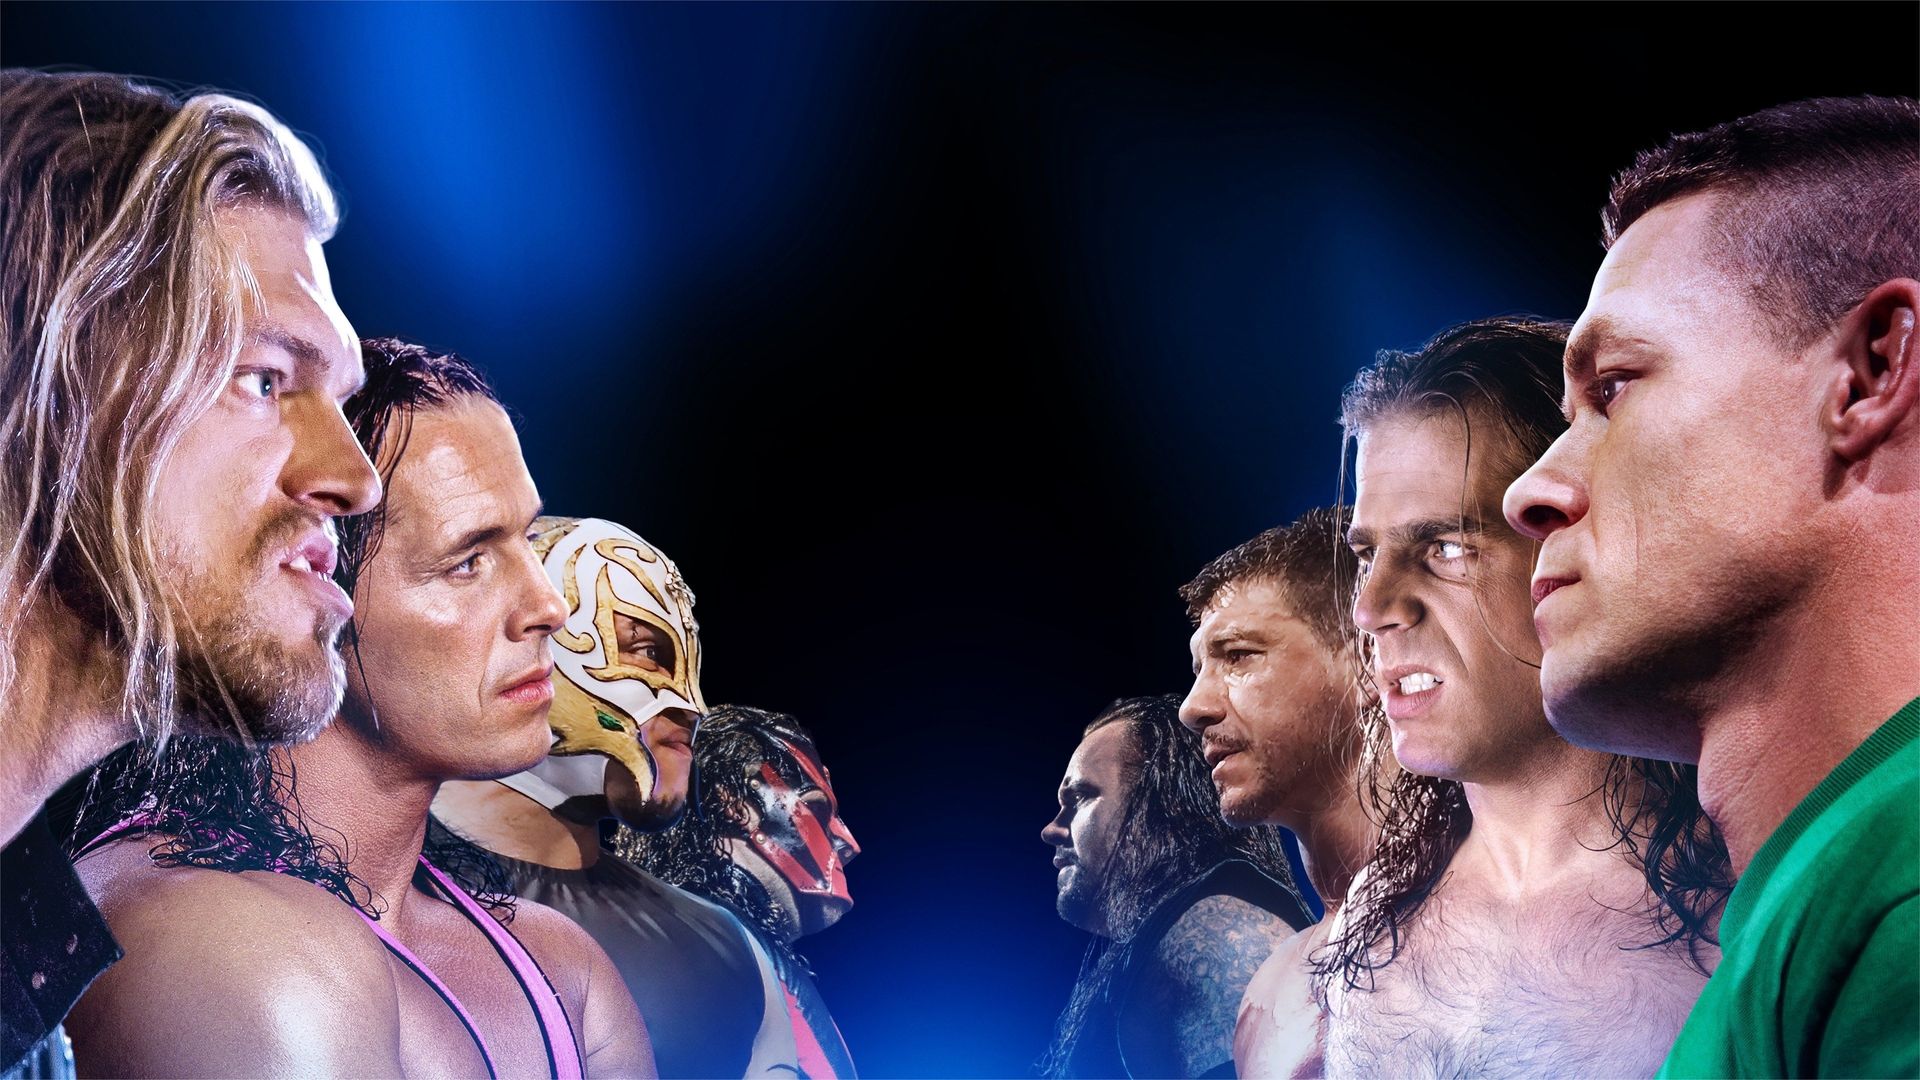 WWE Rivals background